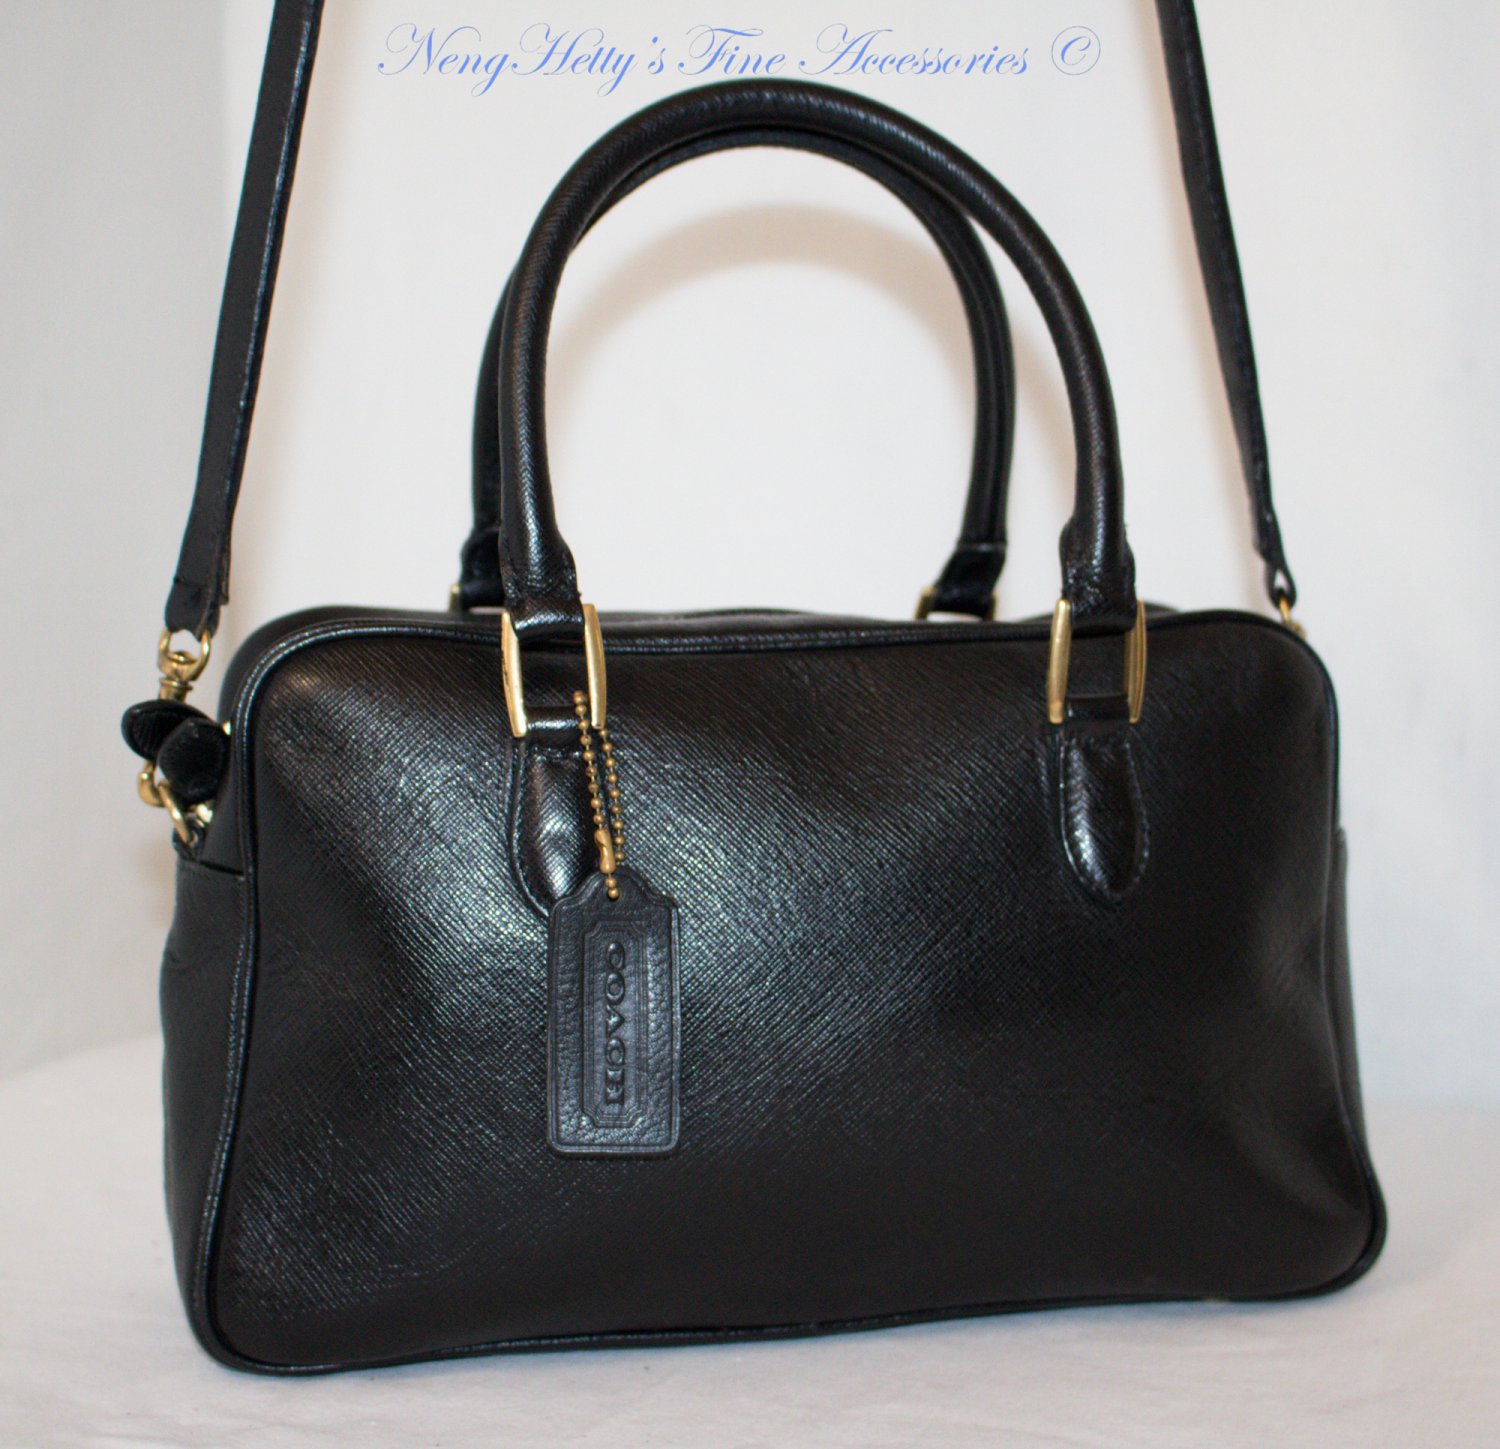 Vintage Coach Gramercy Small Satchel Style #7003 from Italy